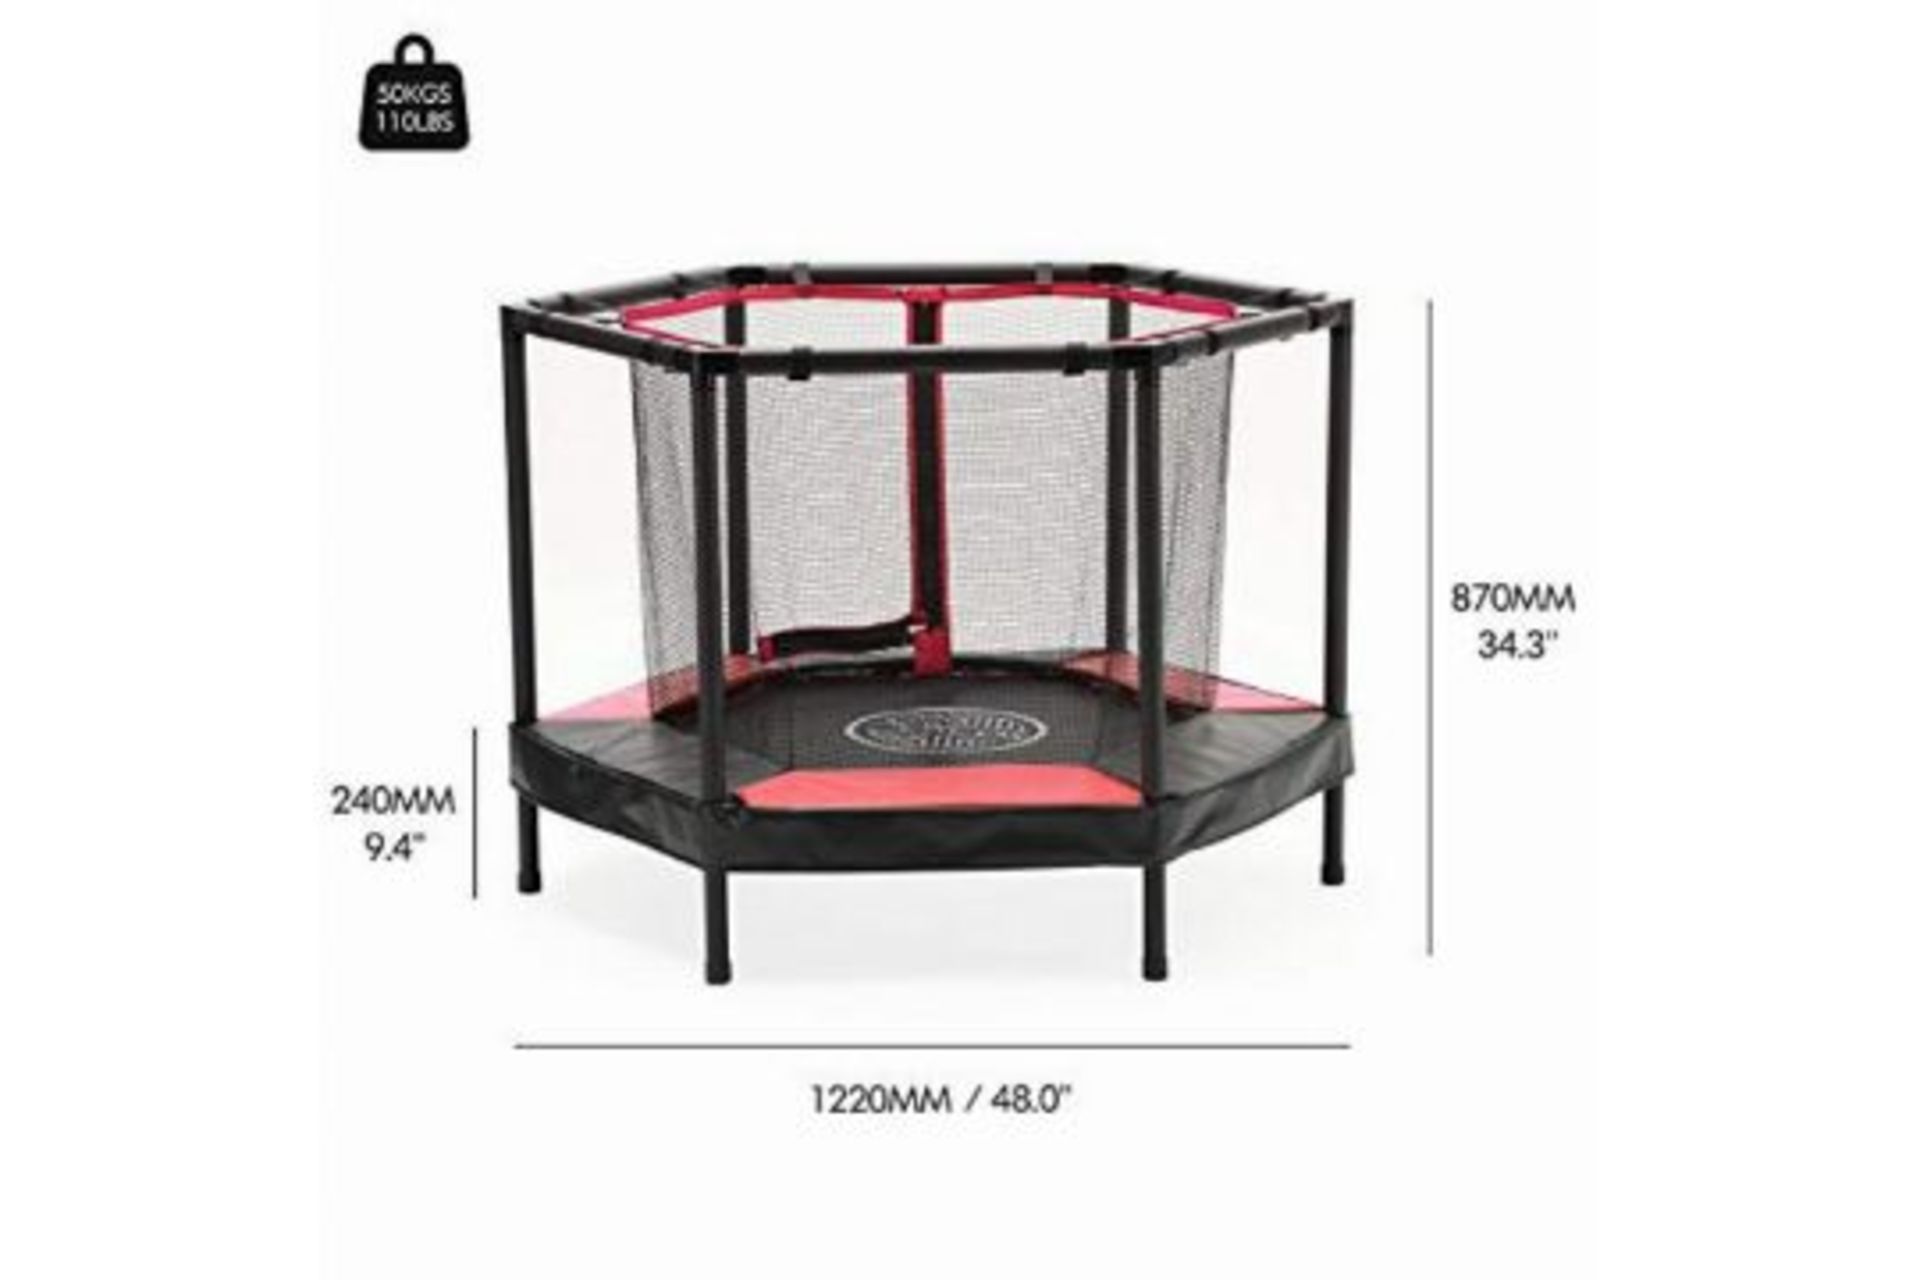 Brand new Kids Trampoline 4Ft Mini Trampolines with Enclosure Net and Safety Pad - Small Toddler - Image 2 of 2